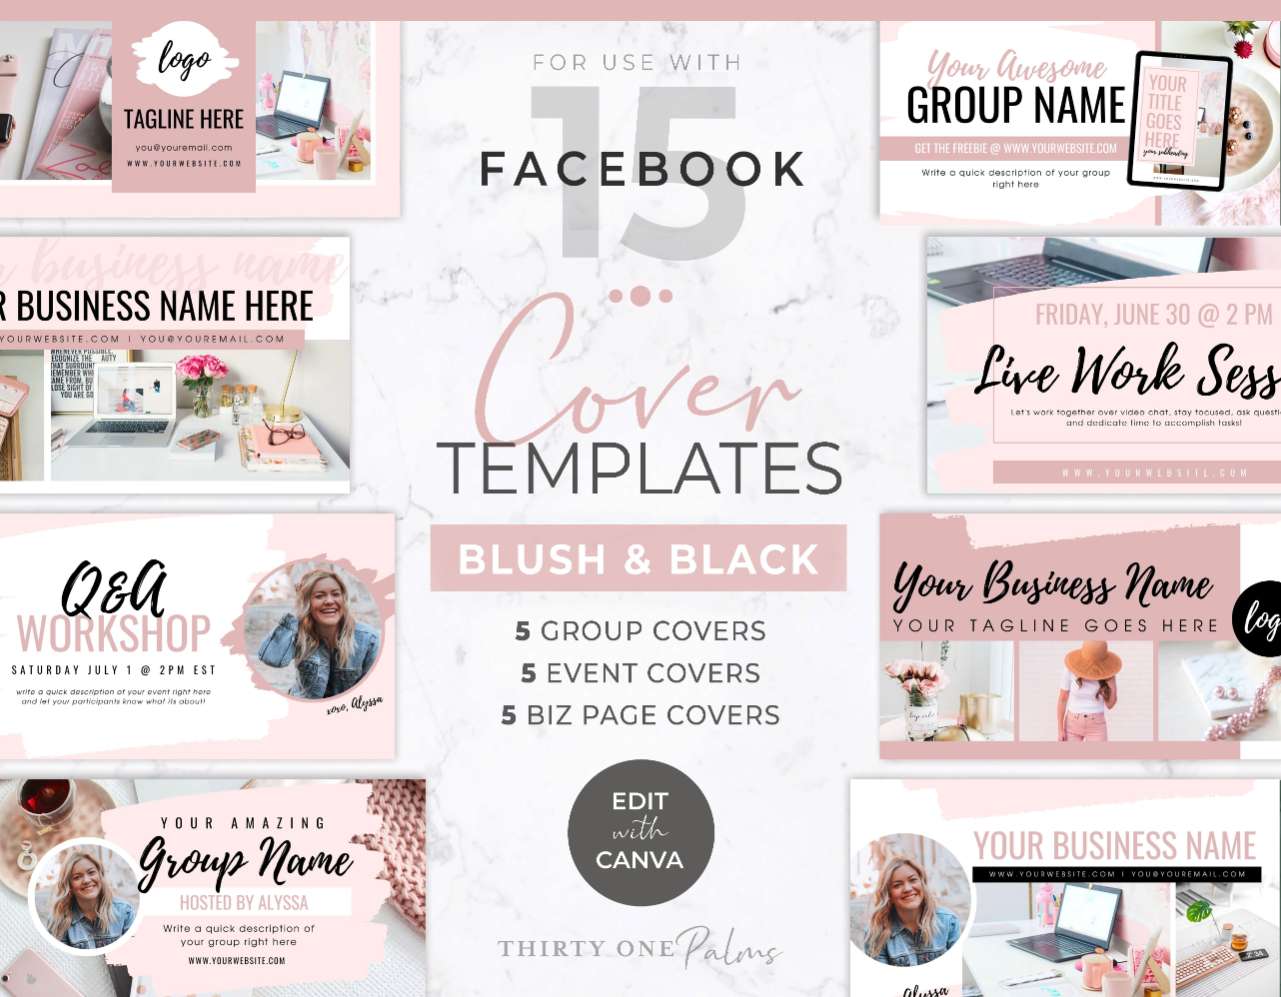 Facebook Cover Templates for Canva - Blush & Black